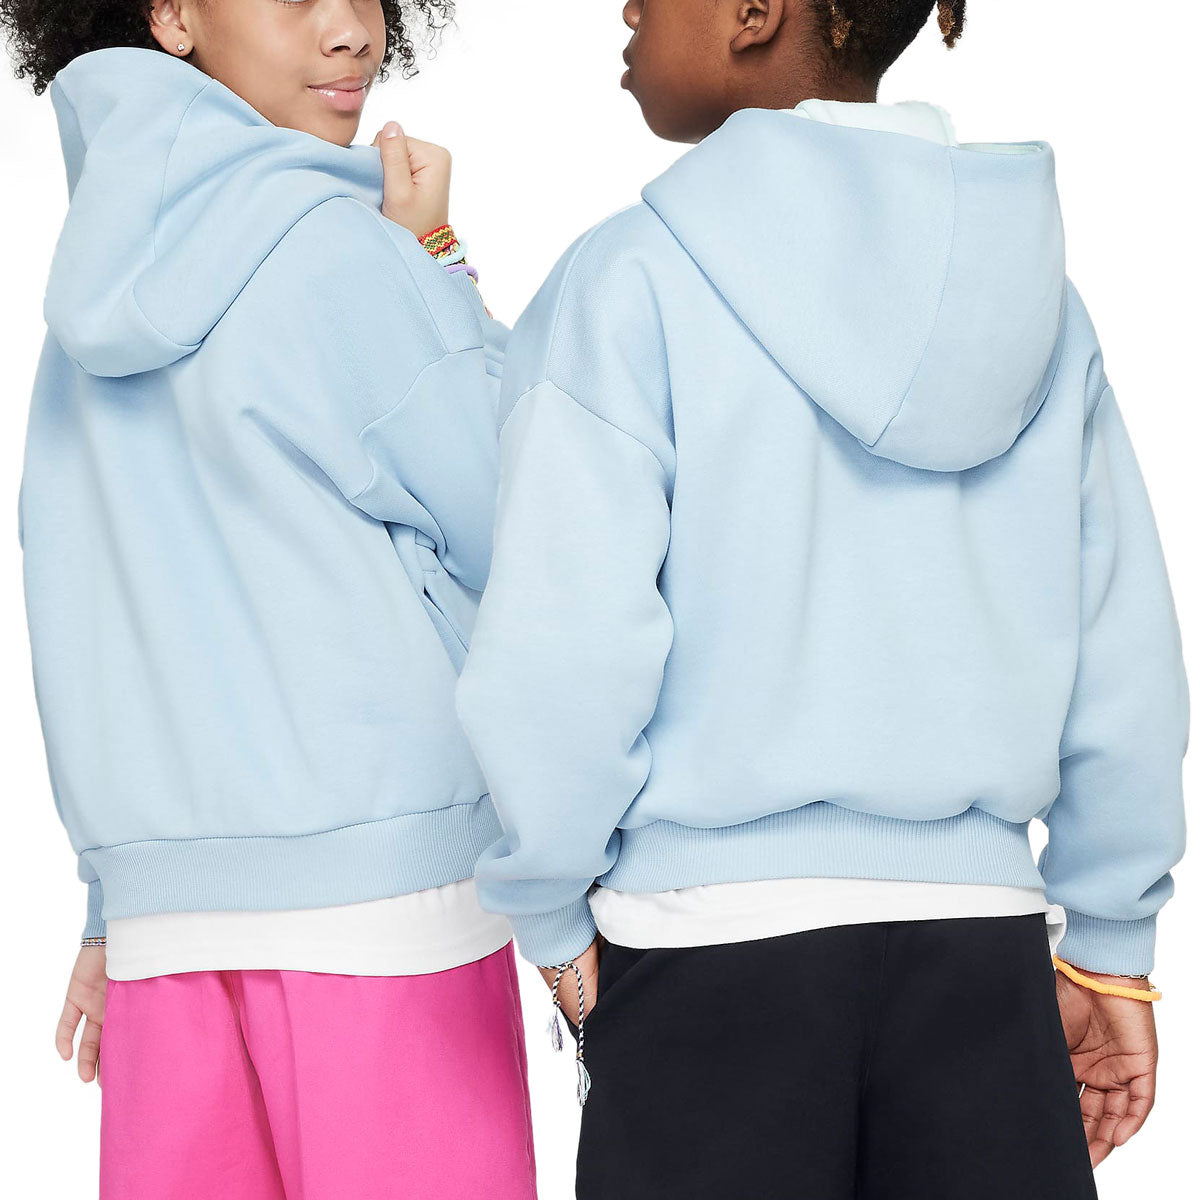 Nike SB Youth Icon Fleece Easy On Hoodie - Light Armory Blue/Barely Green/White image 3